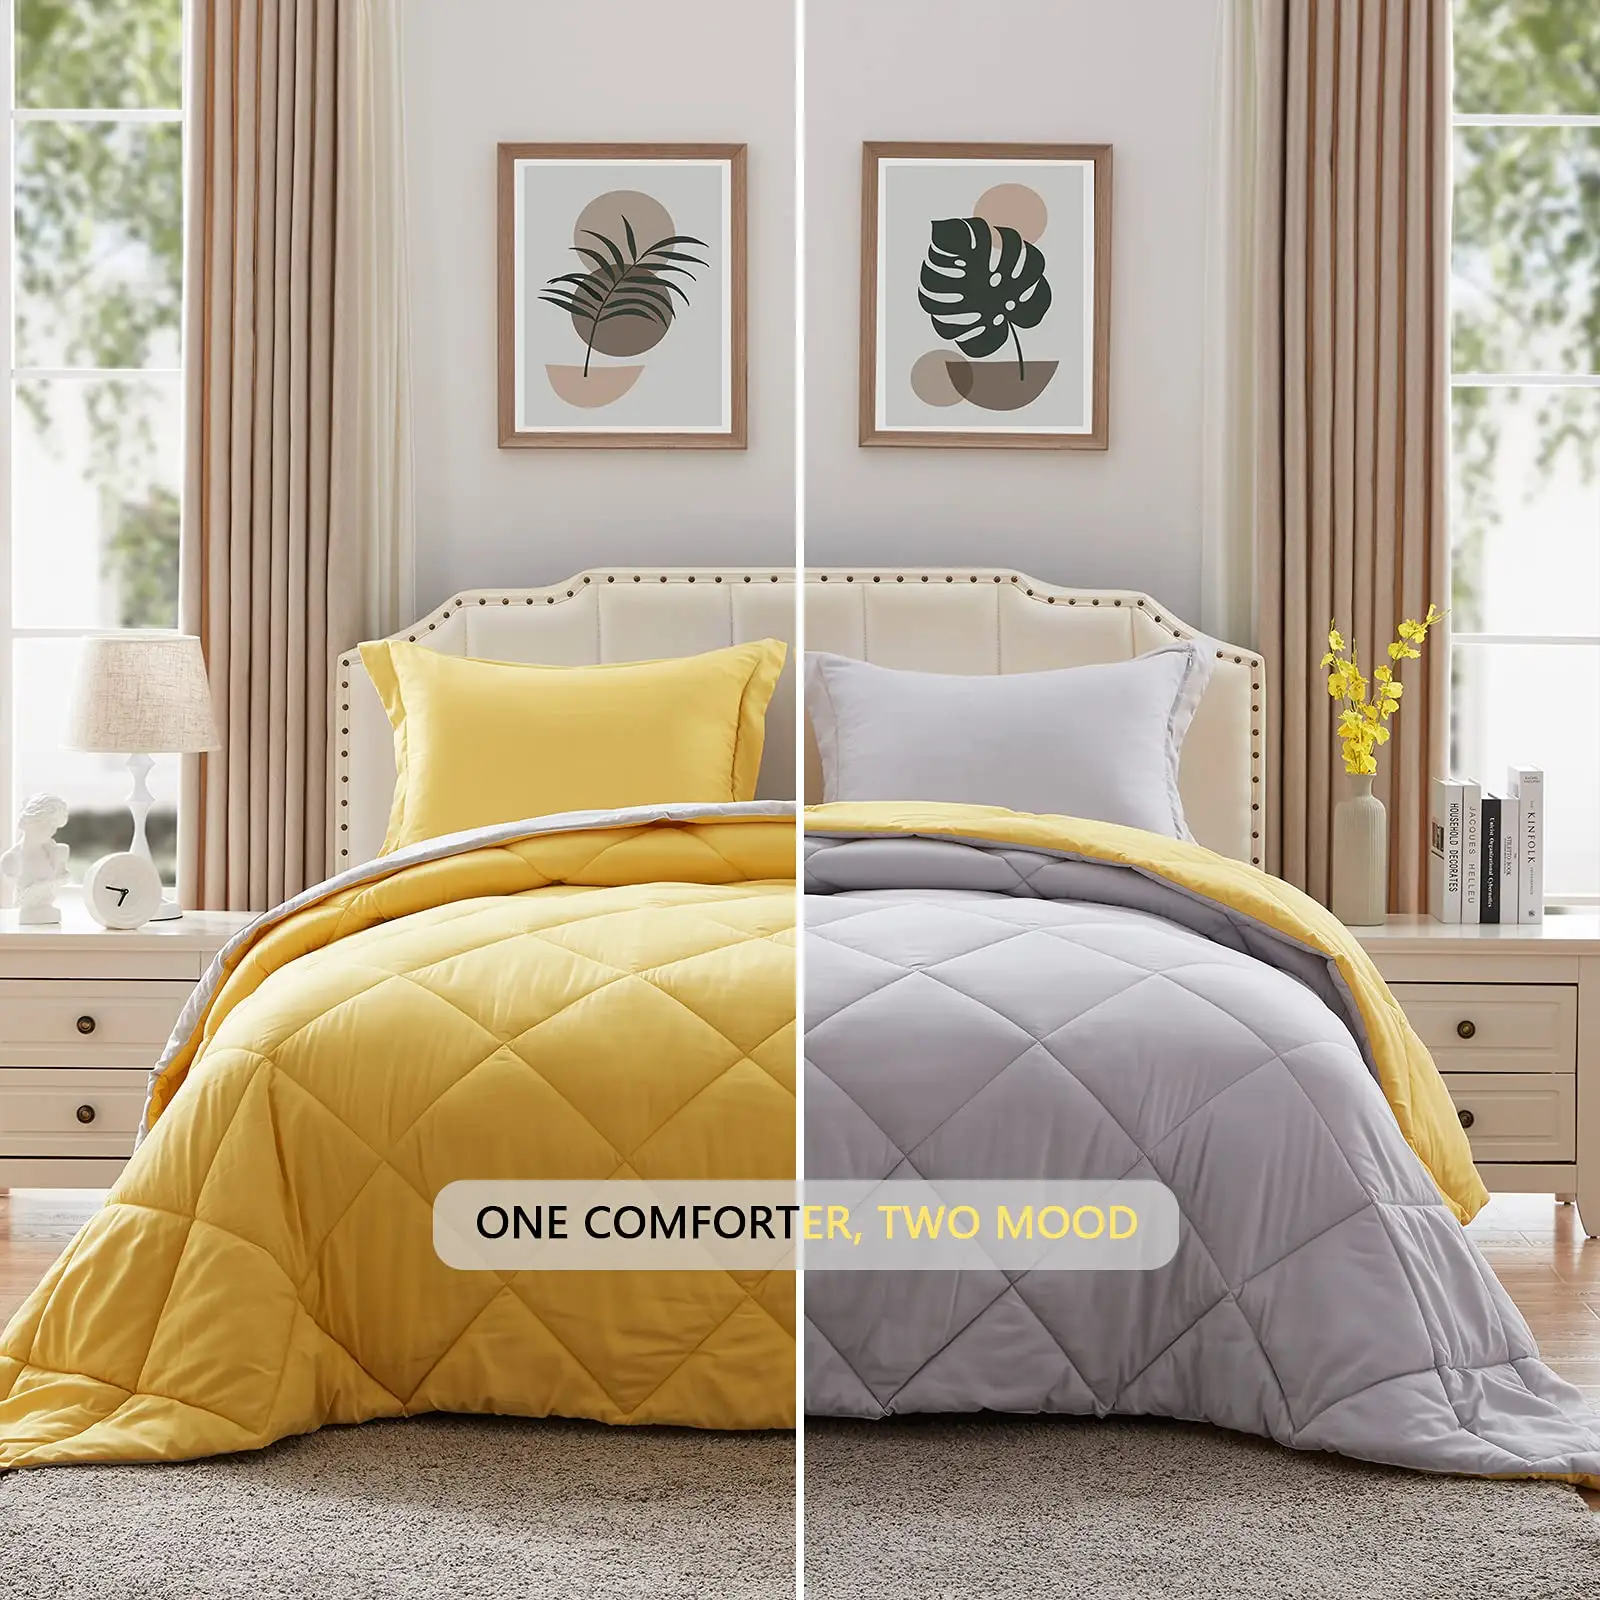 Yuchun BSCI Factory Home Bed Linen Luxury King Set Polyester Bedding Fabric Quilt Comforter Sets Double Duvet Cover